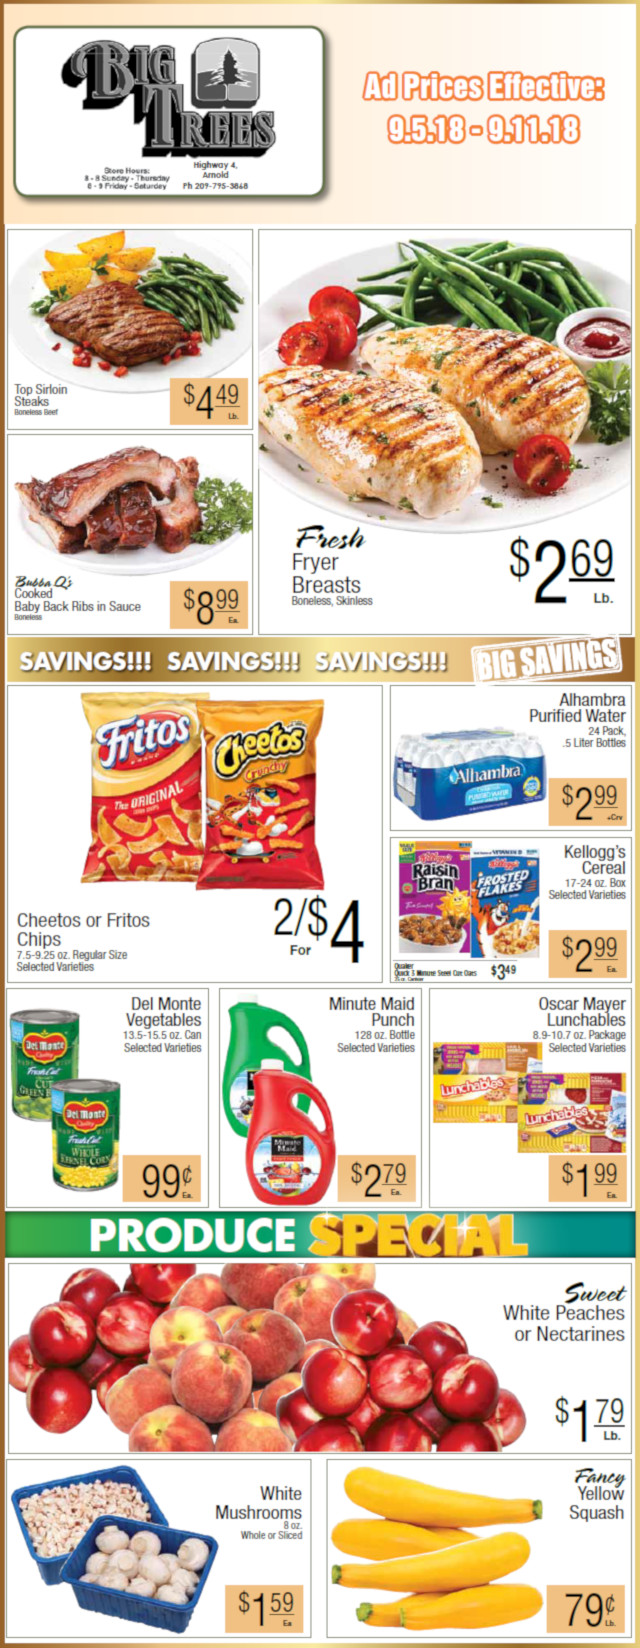 Big Trees Market Weekly Ad & Specials Through September 11th